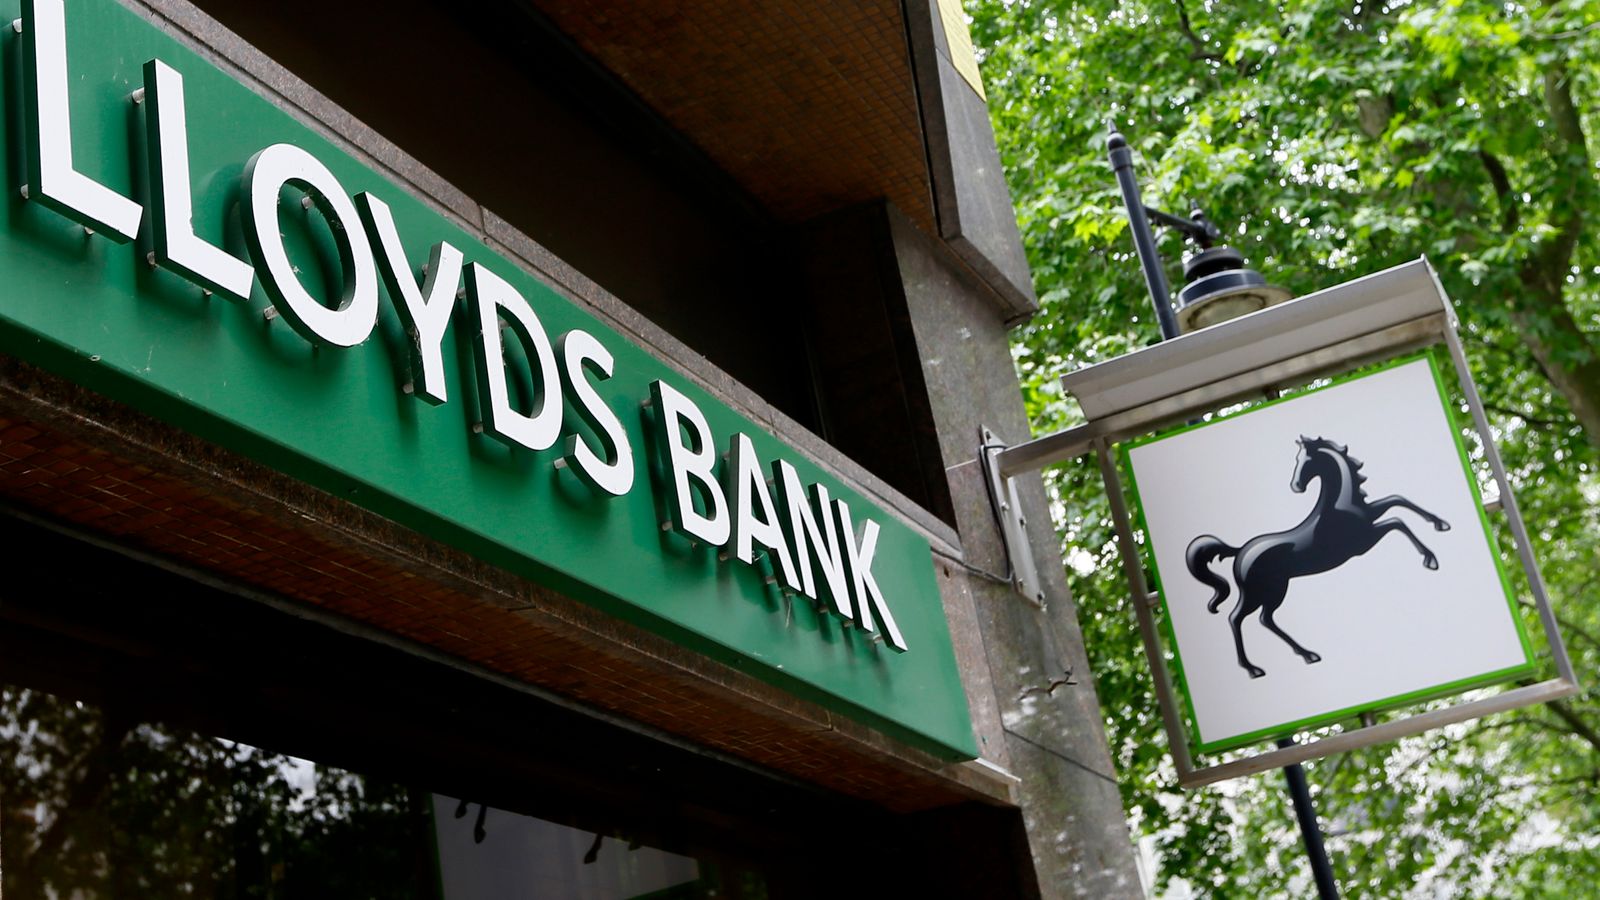 Barclays and Lloyds Announce Massive Branch Closures Amid Online Banking Boom